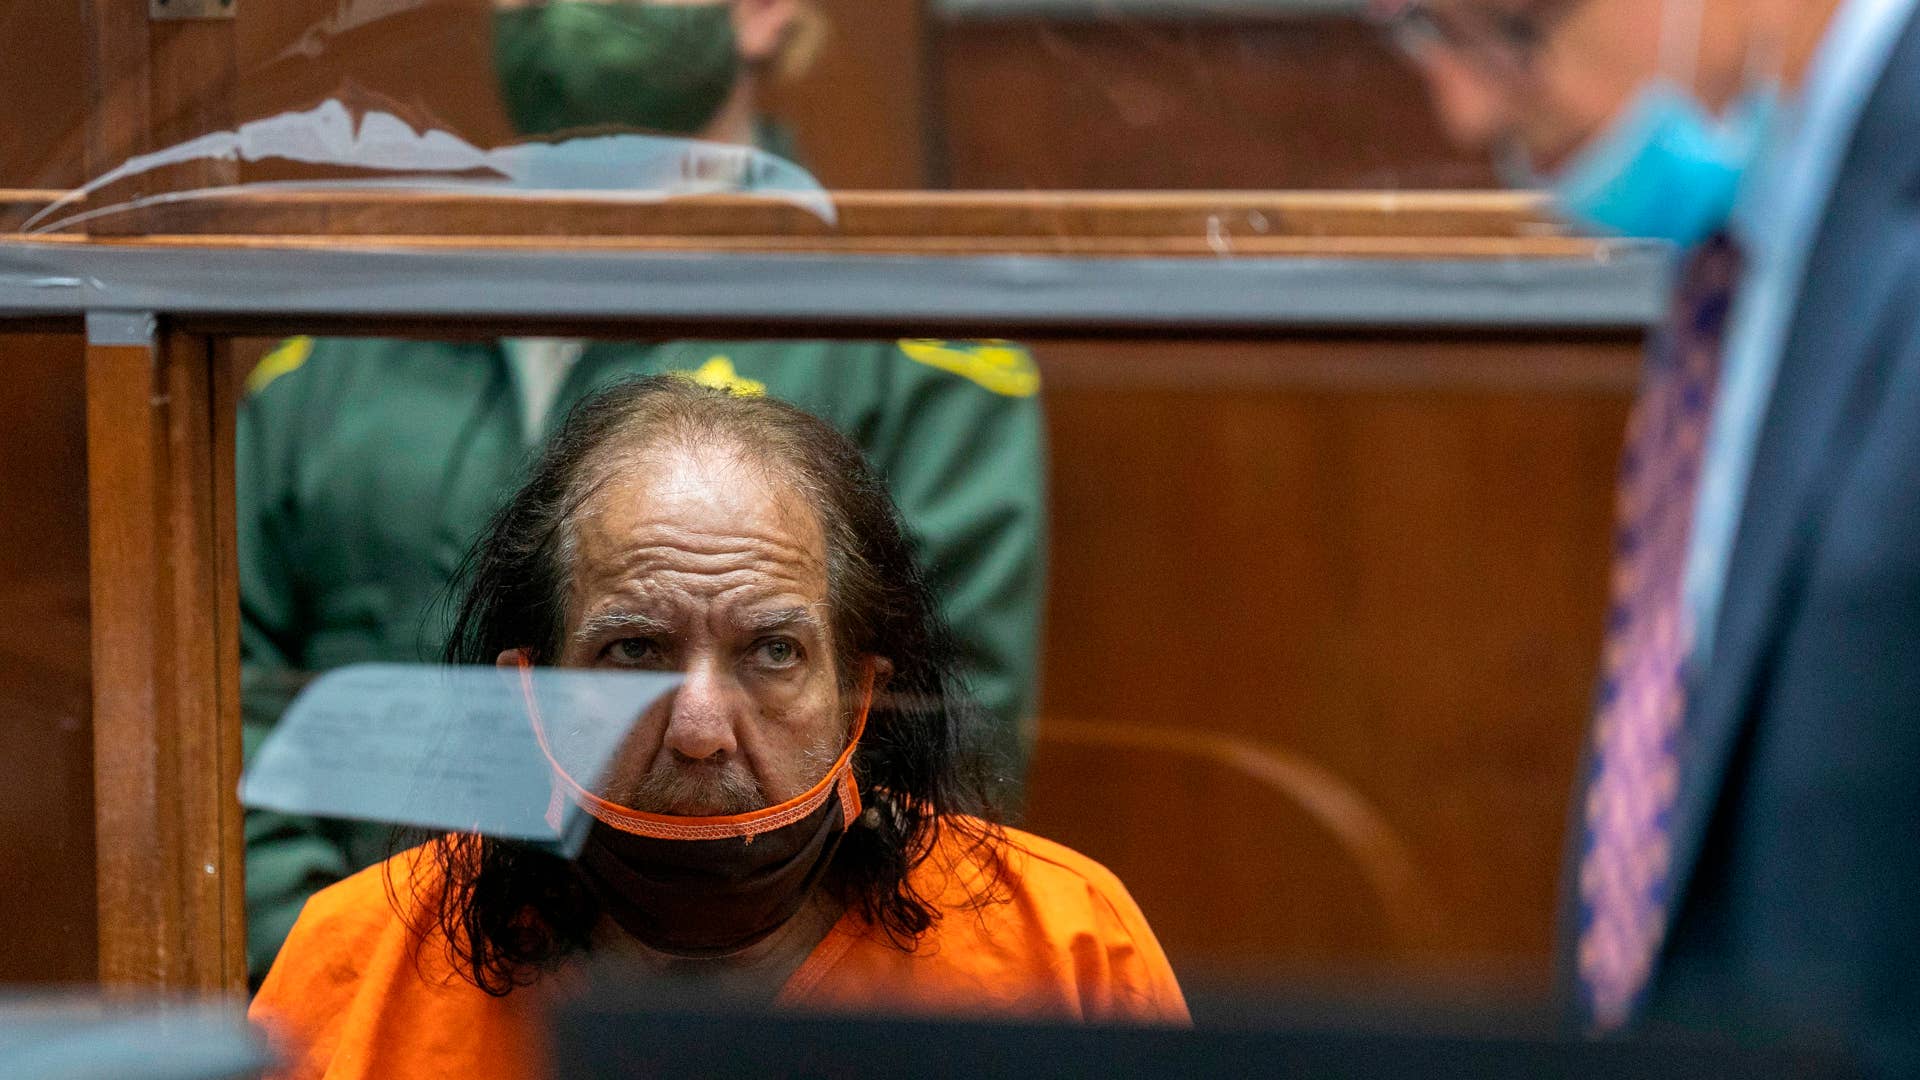 Ron Jeremy is pictured in court room